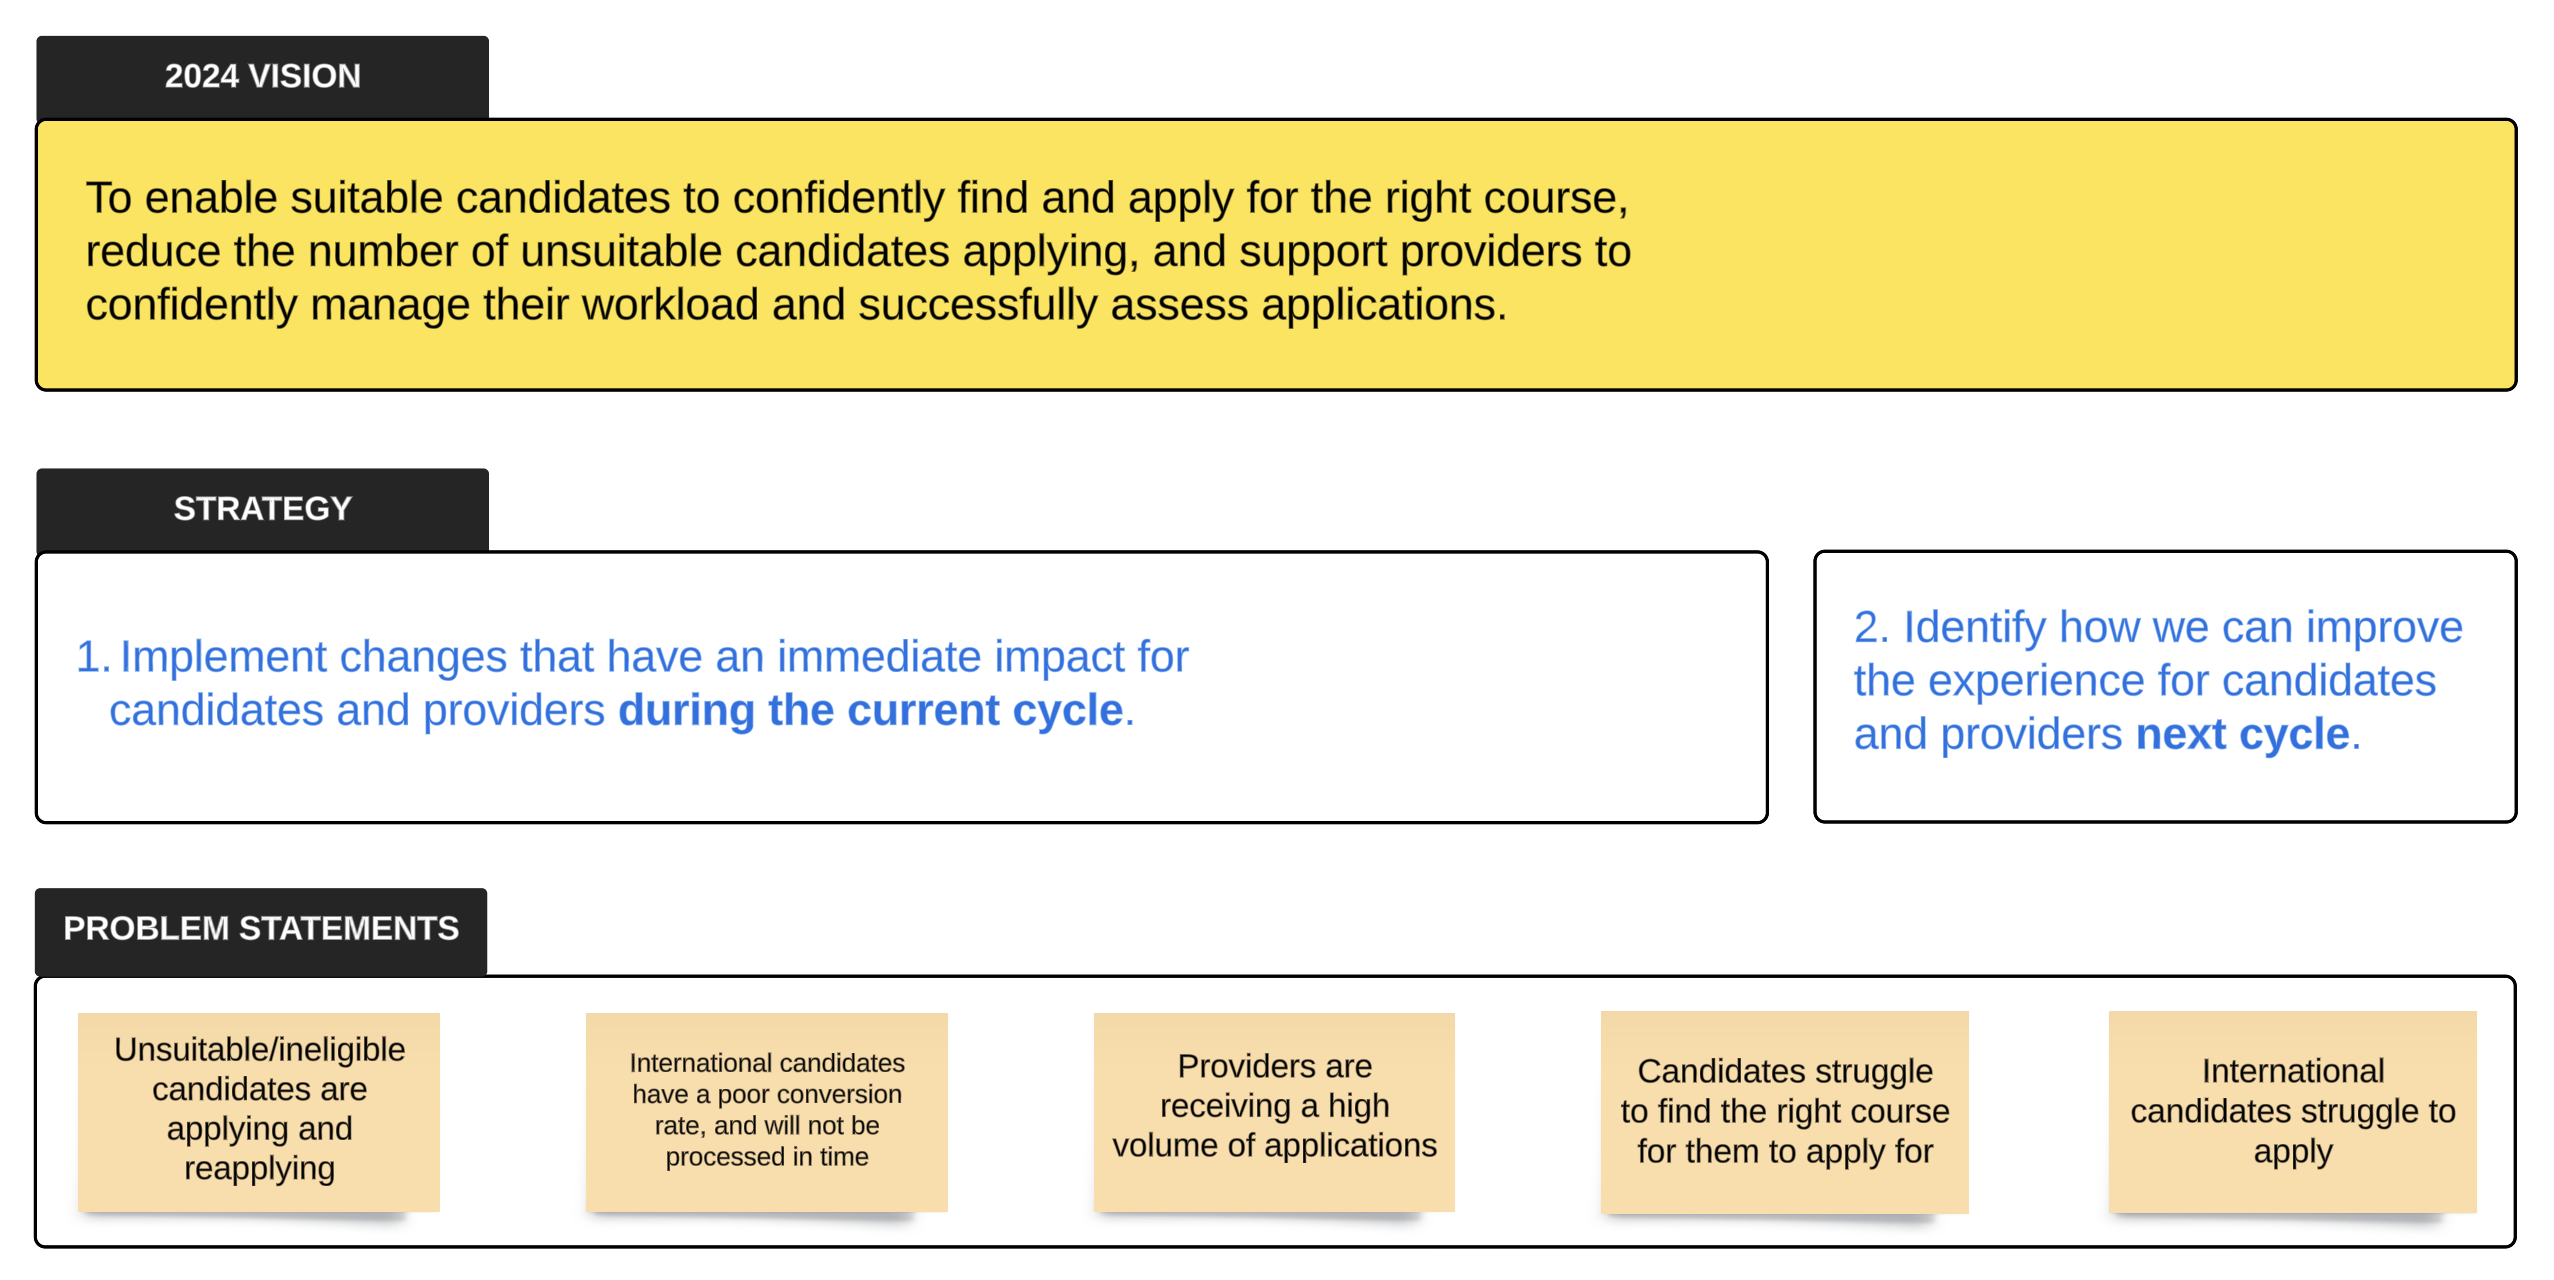 Screenshot of the team's five chosen problem statements alongside the strategy and vision for 2024